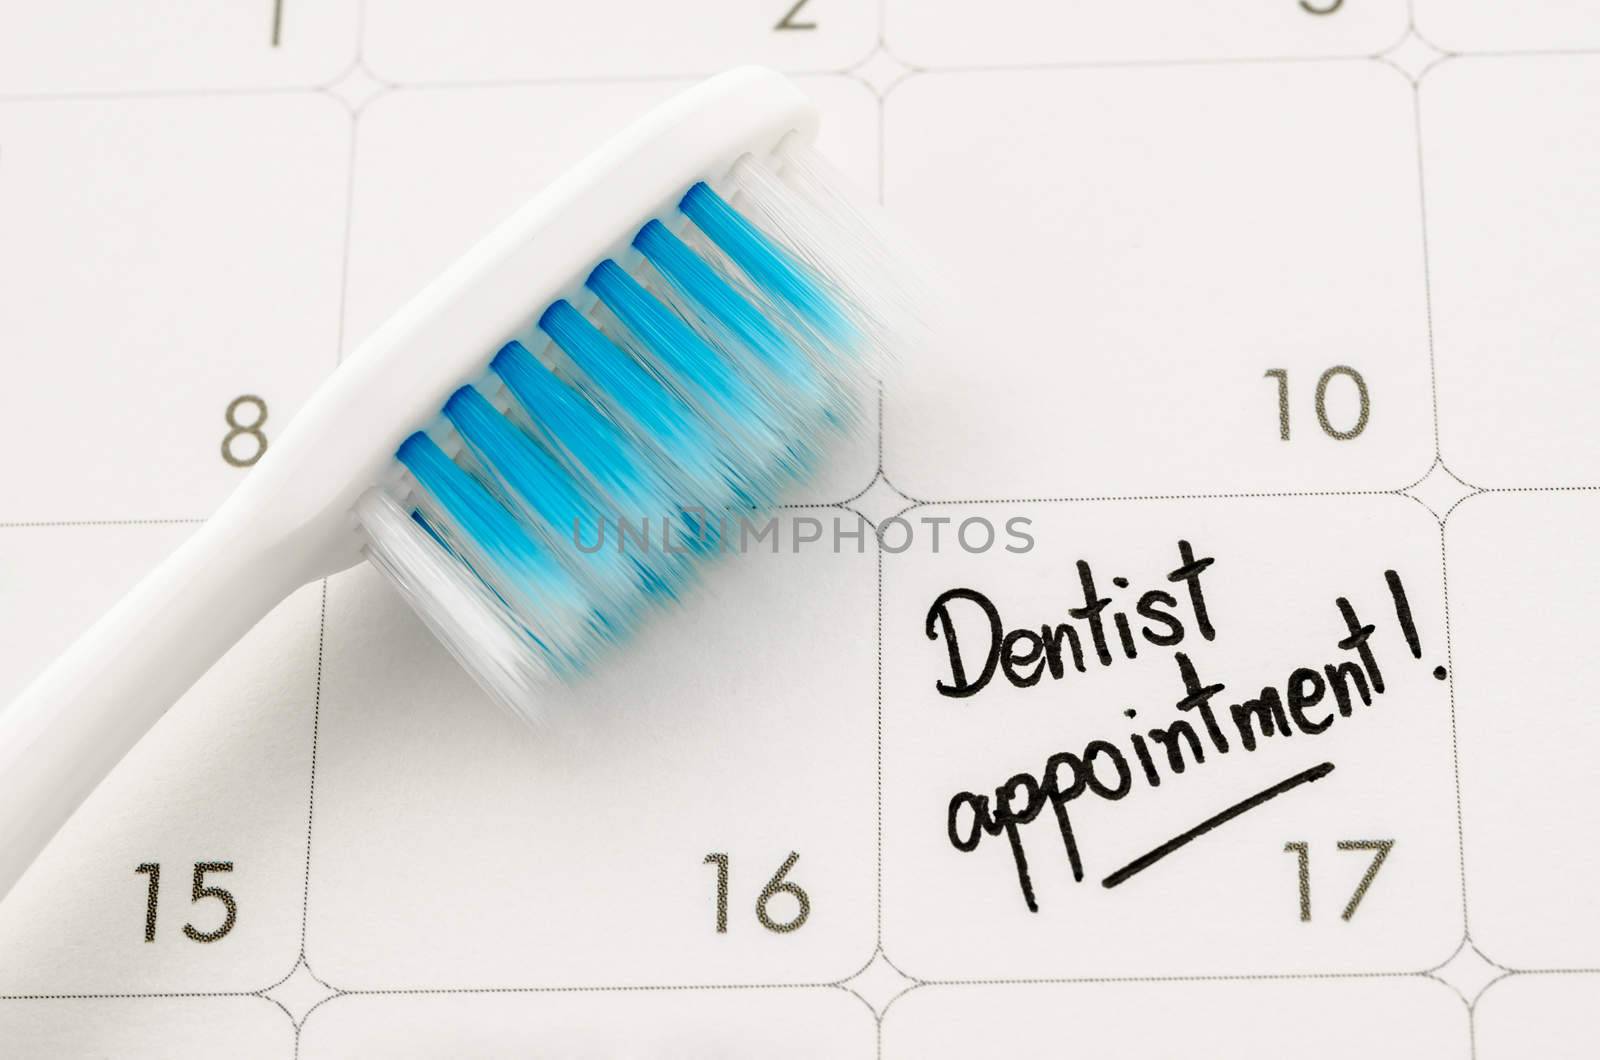 Reminder "Dentist appointment" in calendar with toothbrush.